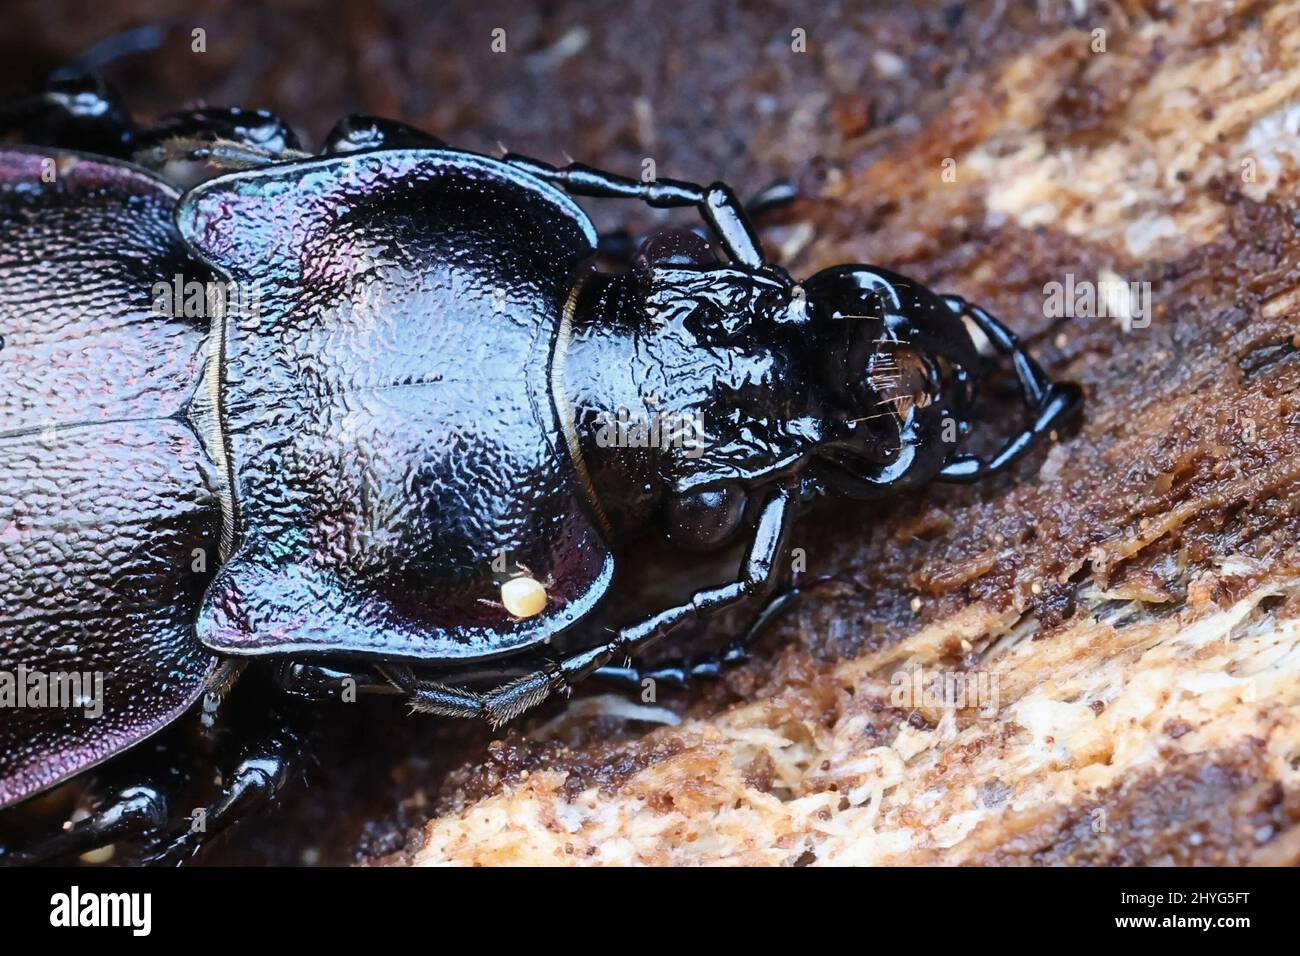 Carabus nemoralis, commonly called the Bronze Carabid, overwintering in a spruce stump in Finland Stock Photo